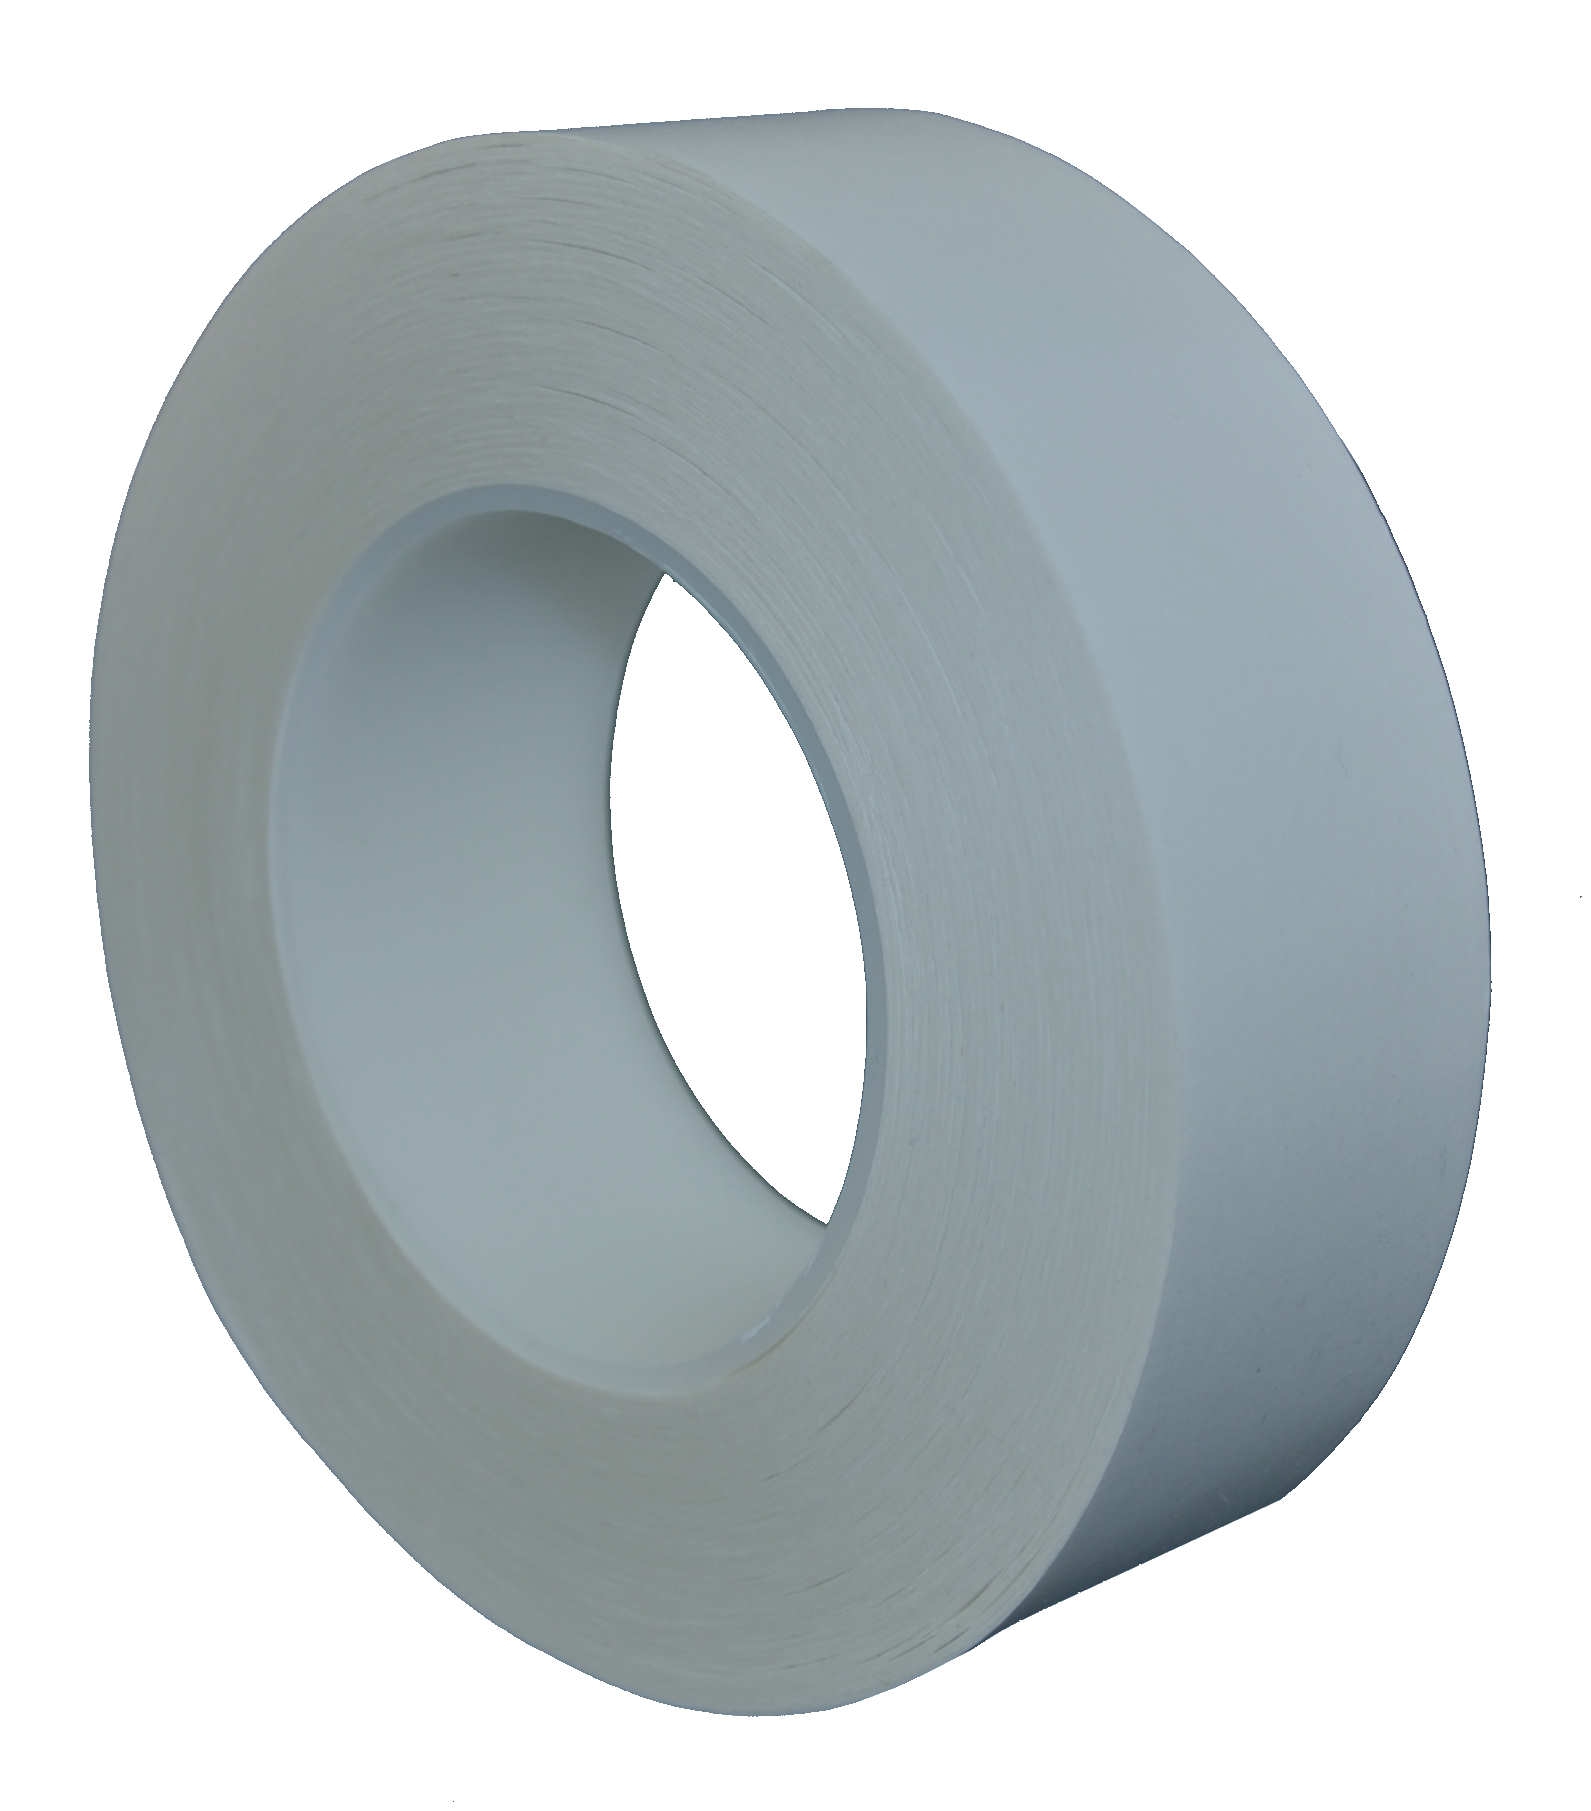 S-K-S dubbelzijdig plakband met polyester drager 480, transparant, 6 mm x 50 m, 0,09 mm